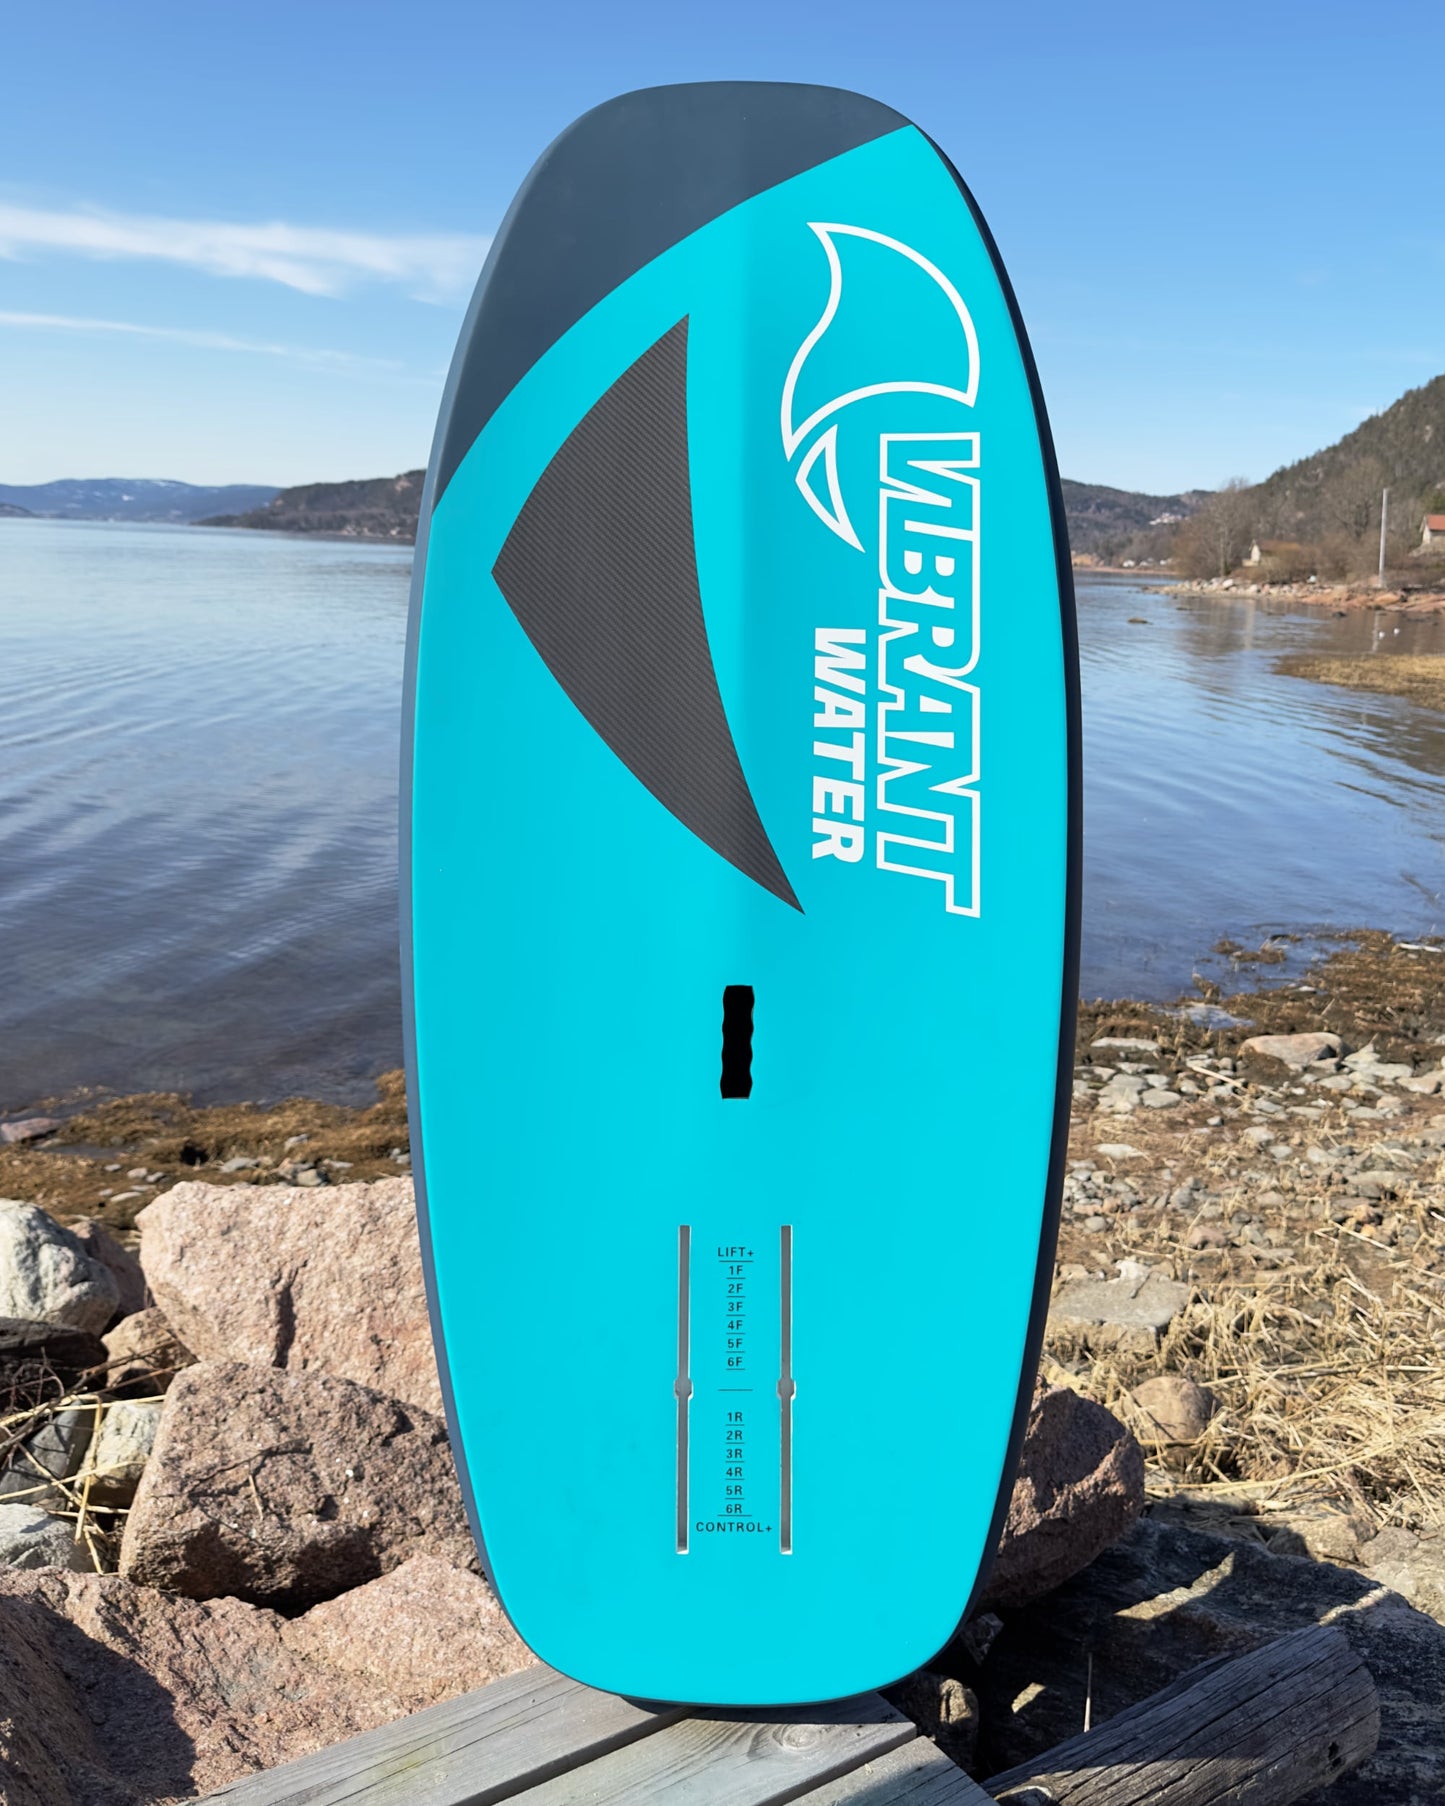 VIBRANT SURF - 5´1´´board and 940 foil offer